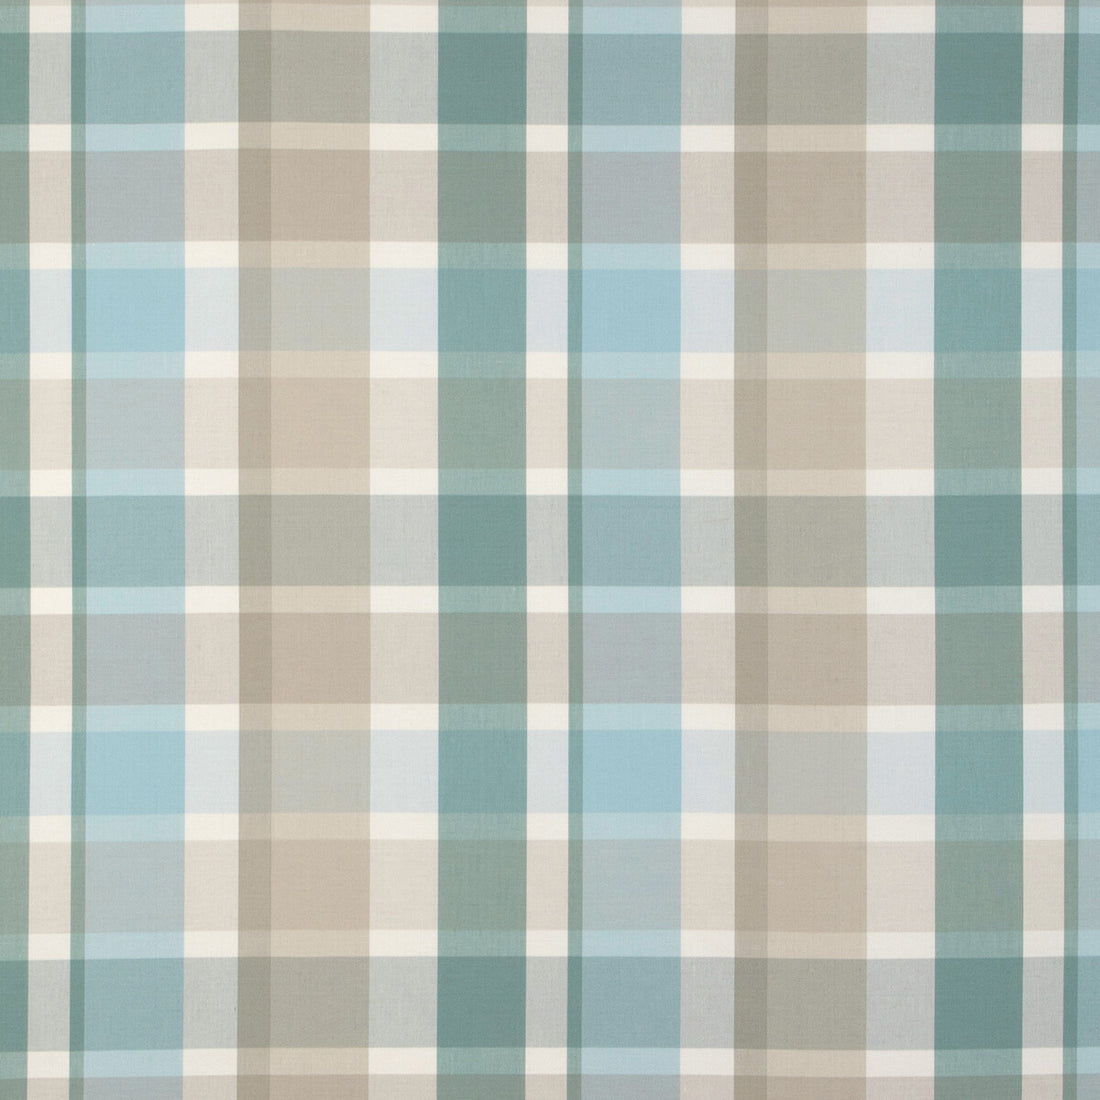 Fisher Plaid fabric in sky/stone color - pattern 2023107.1511.0 - by Lee Jofa in the Highfield Stripes And Plaids collection